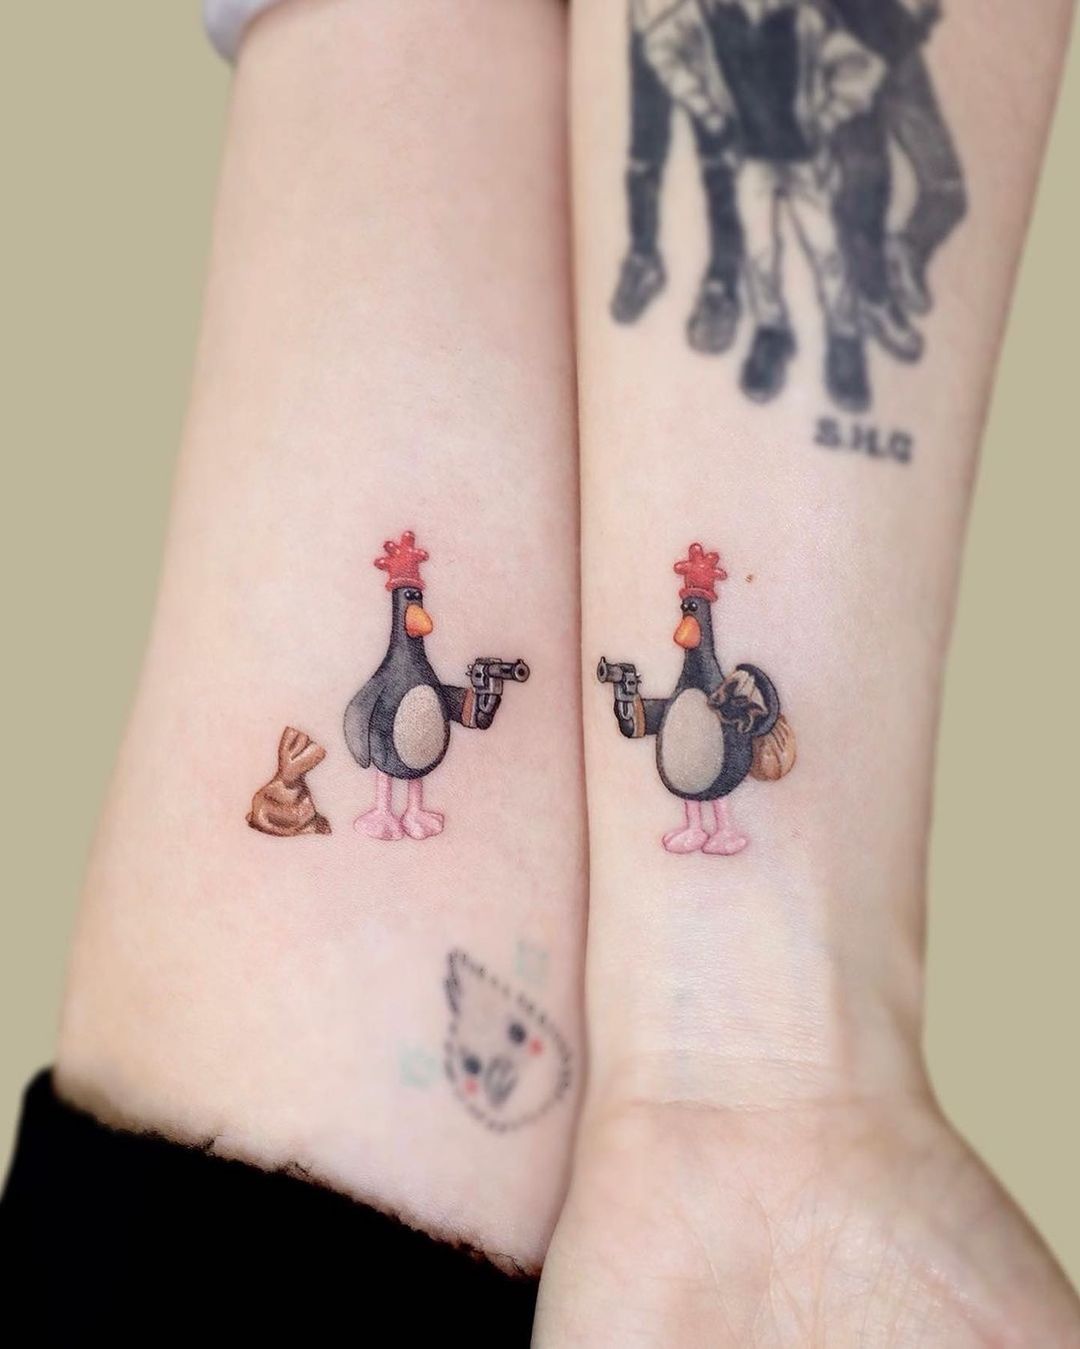 Game tattoos for women by comicsandgamestattoos